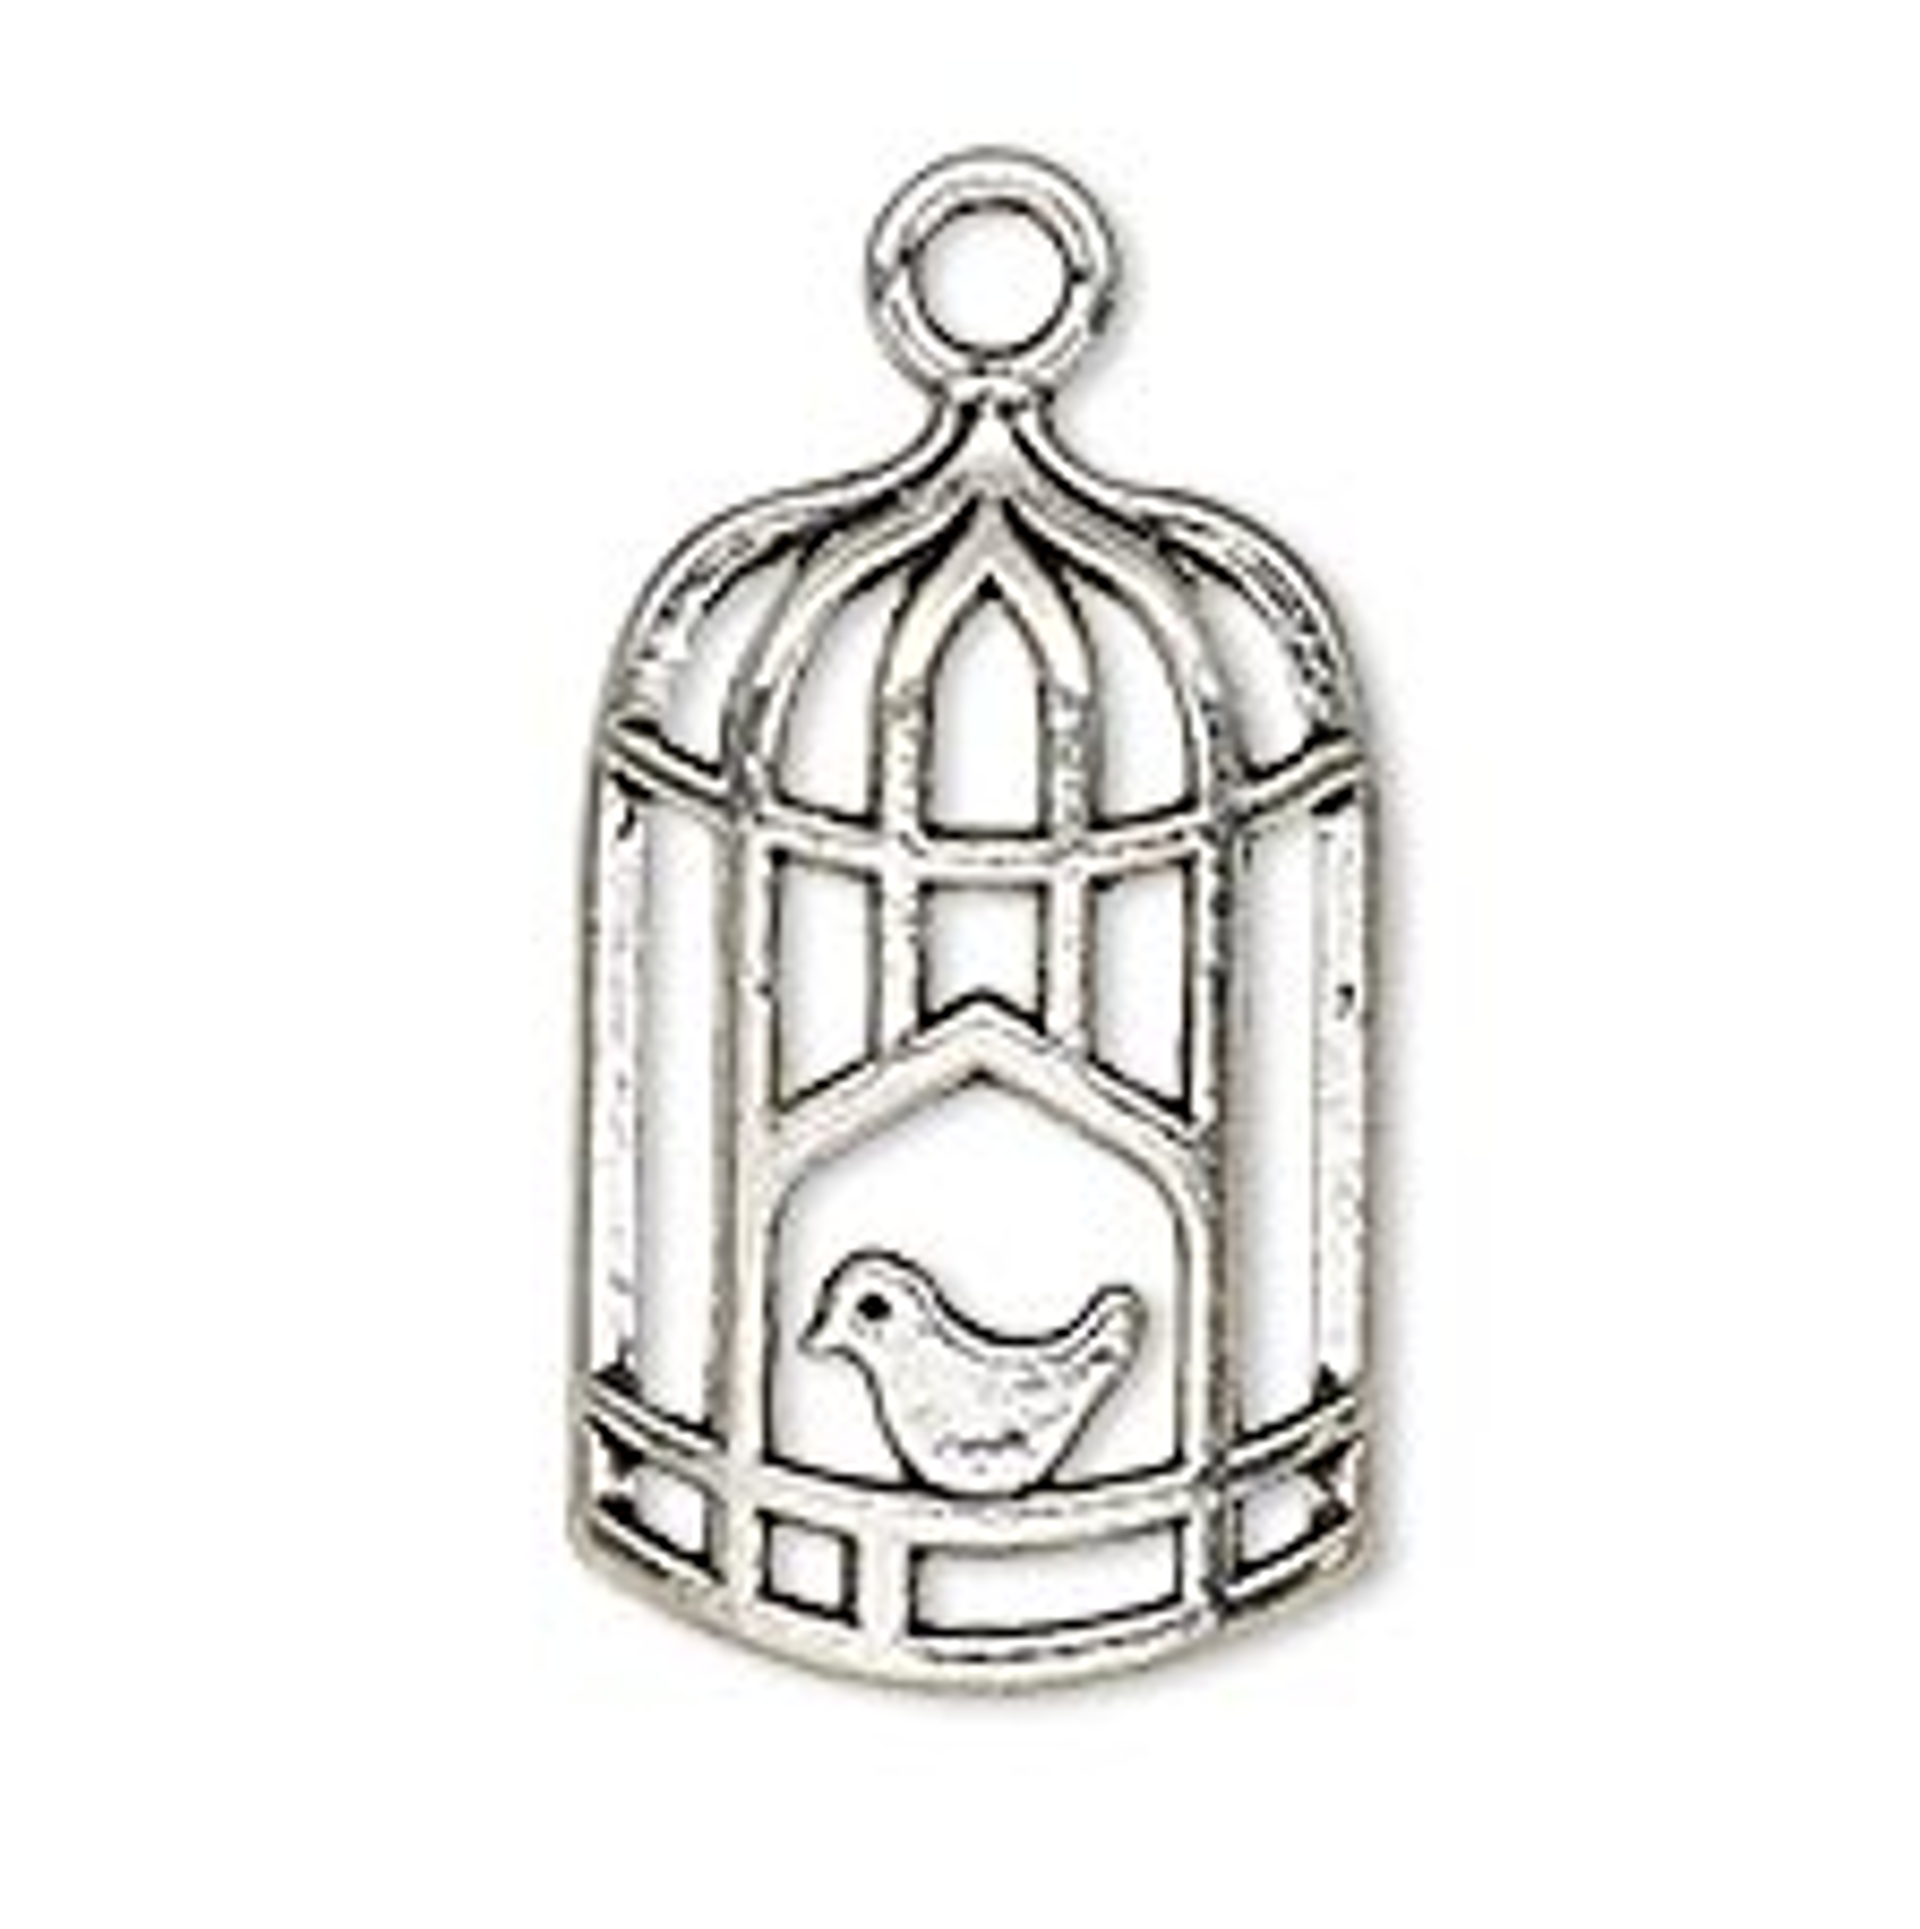 Necklace - Silver Tone Bird in Cage by Indigo Desert Ranch - Jewelry